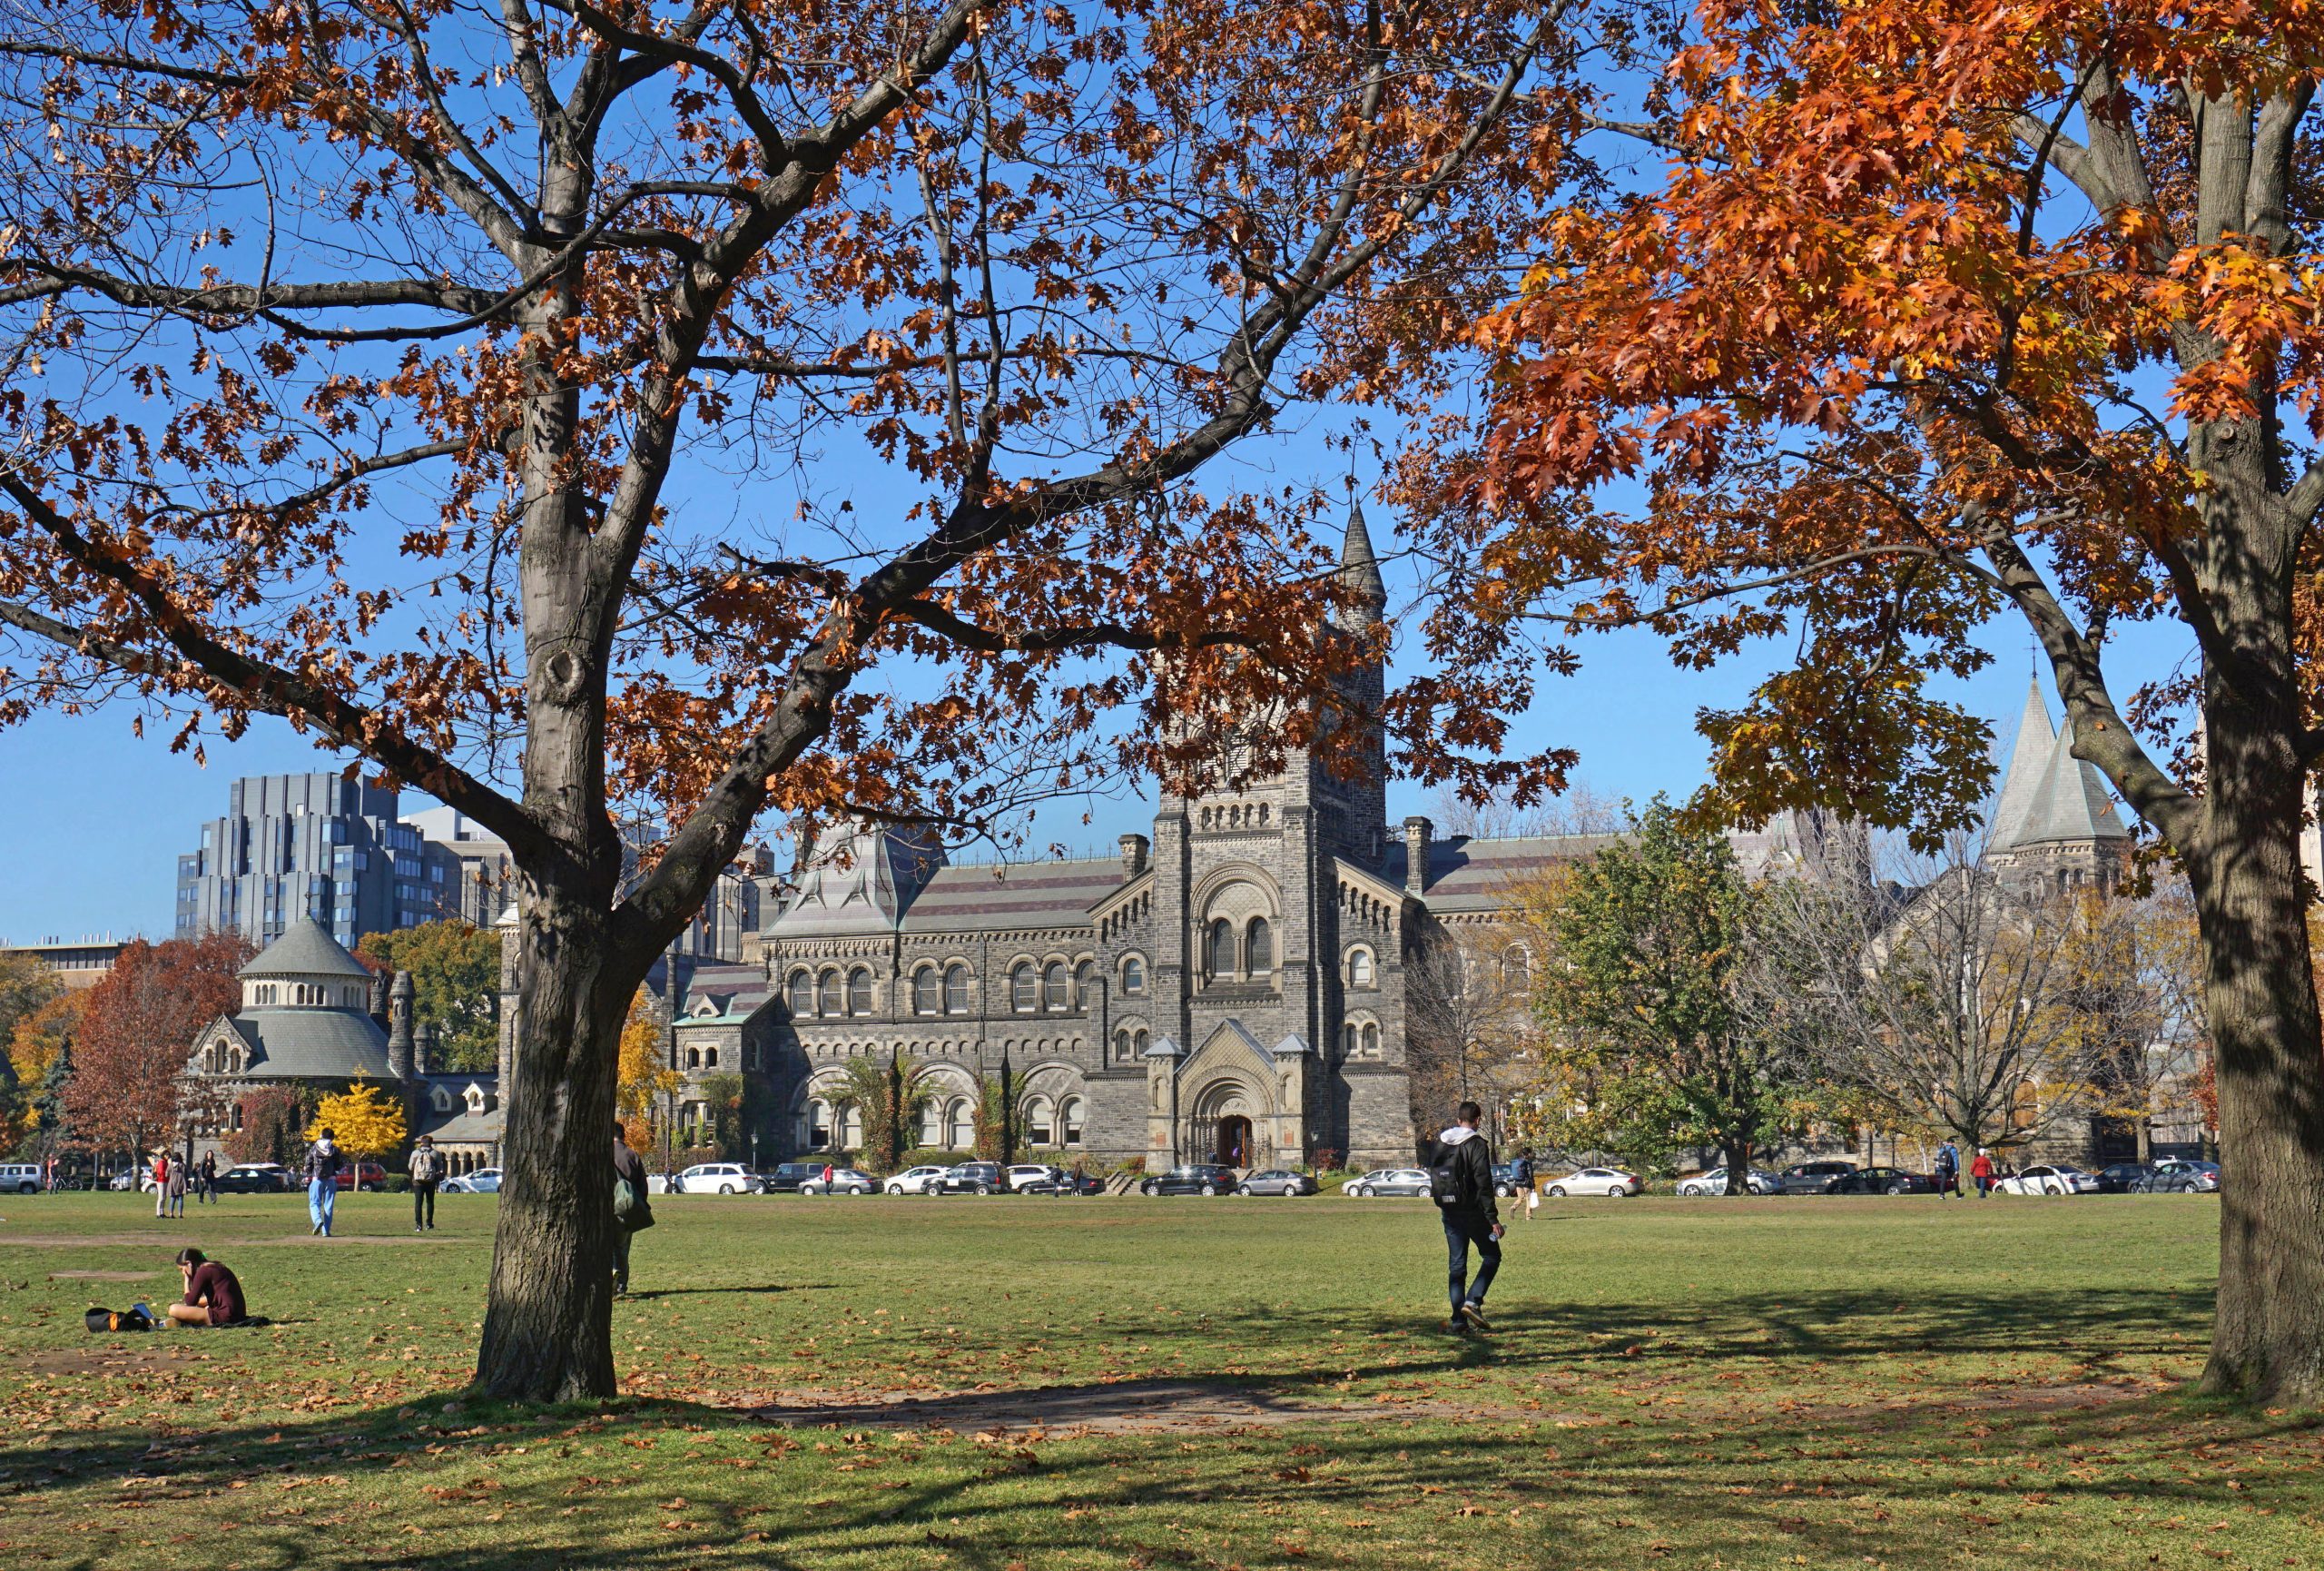 An image of a college campus for our article on 30 Amazing Landmarks at Small Colleges in the U.S.